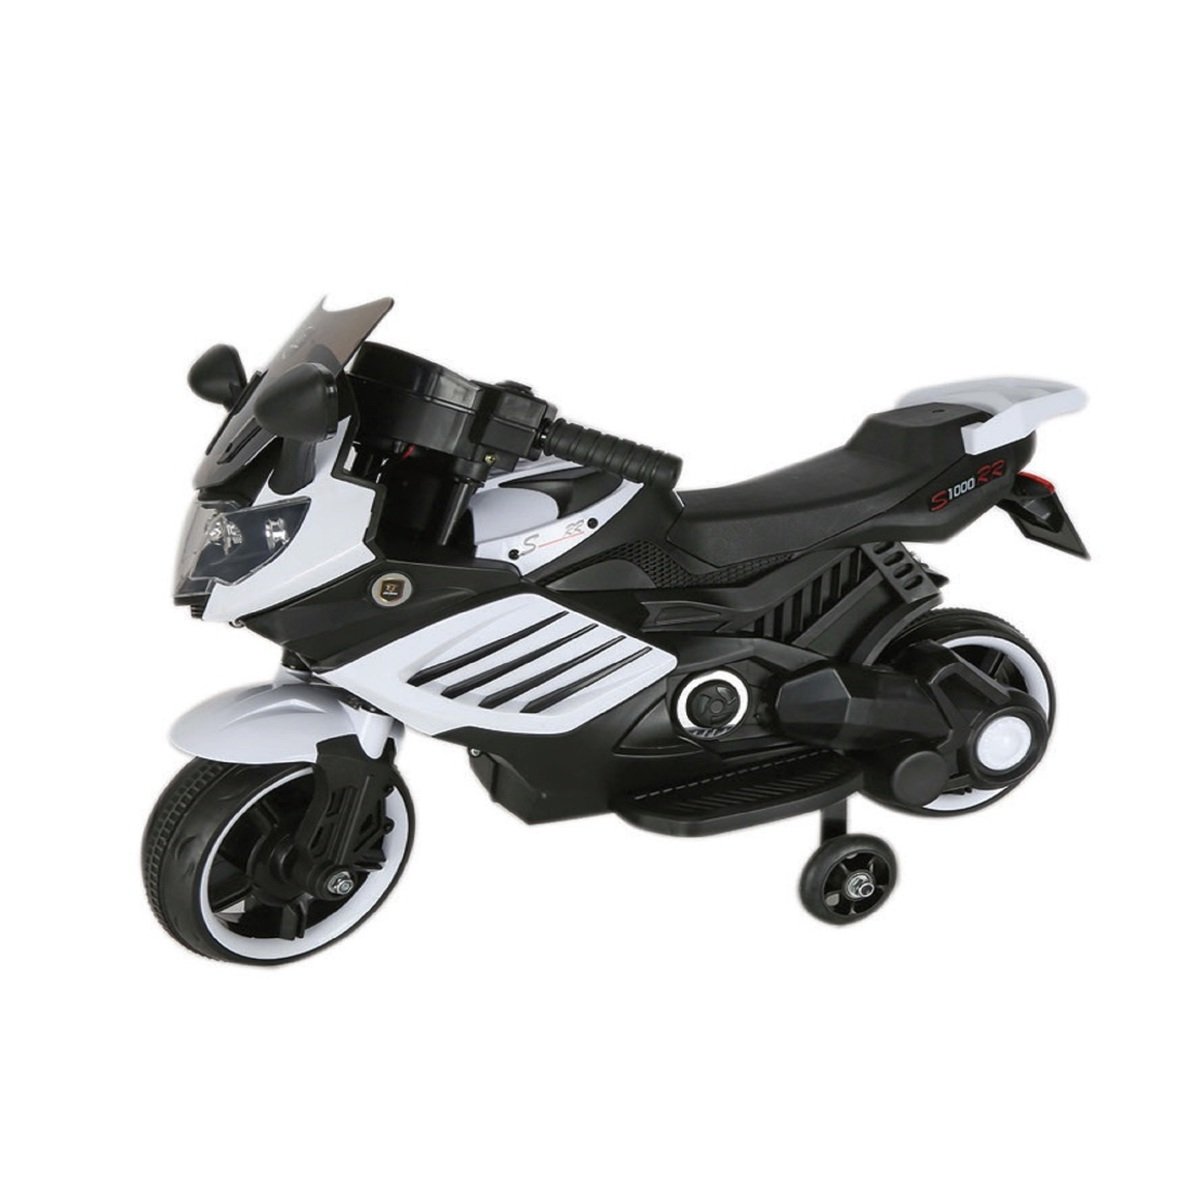 Skid Fusion Rechargeable MotorBike S1000-RR